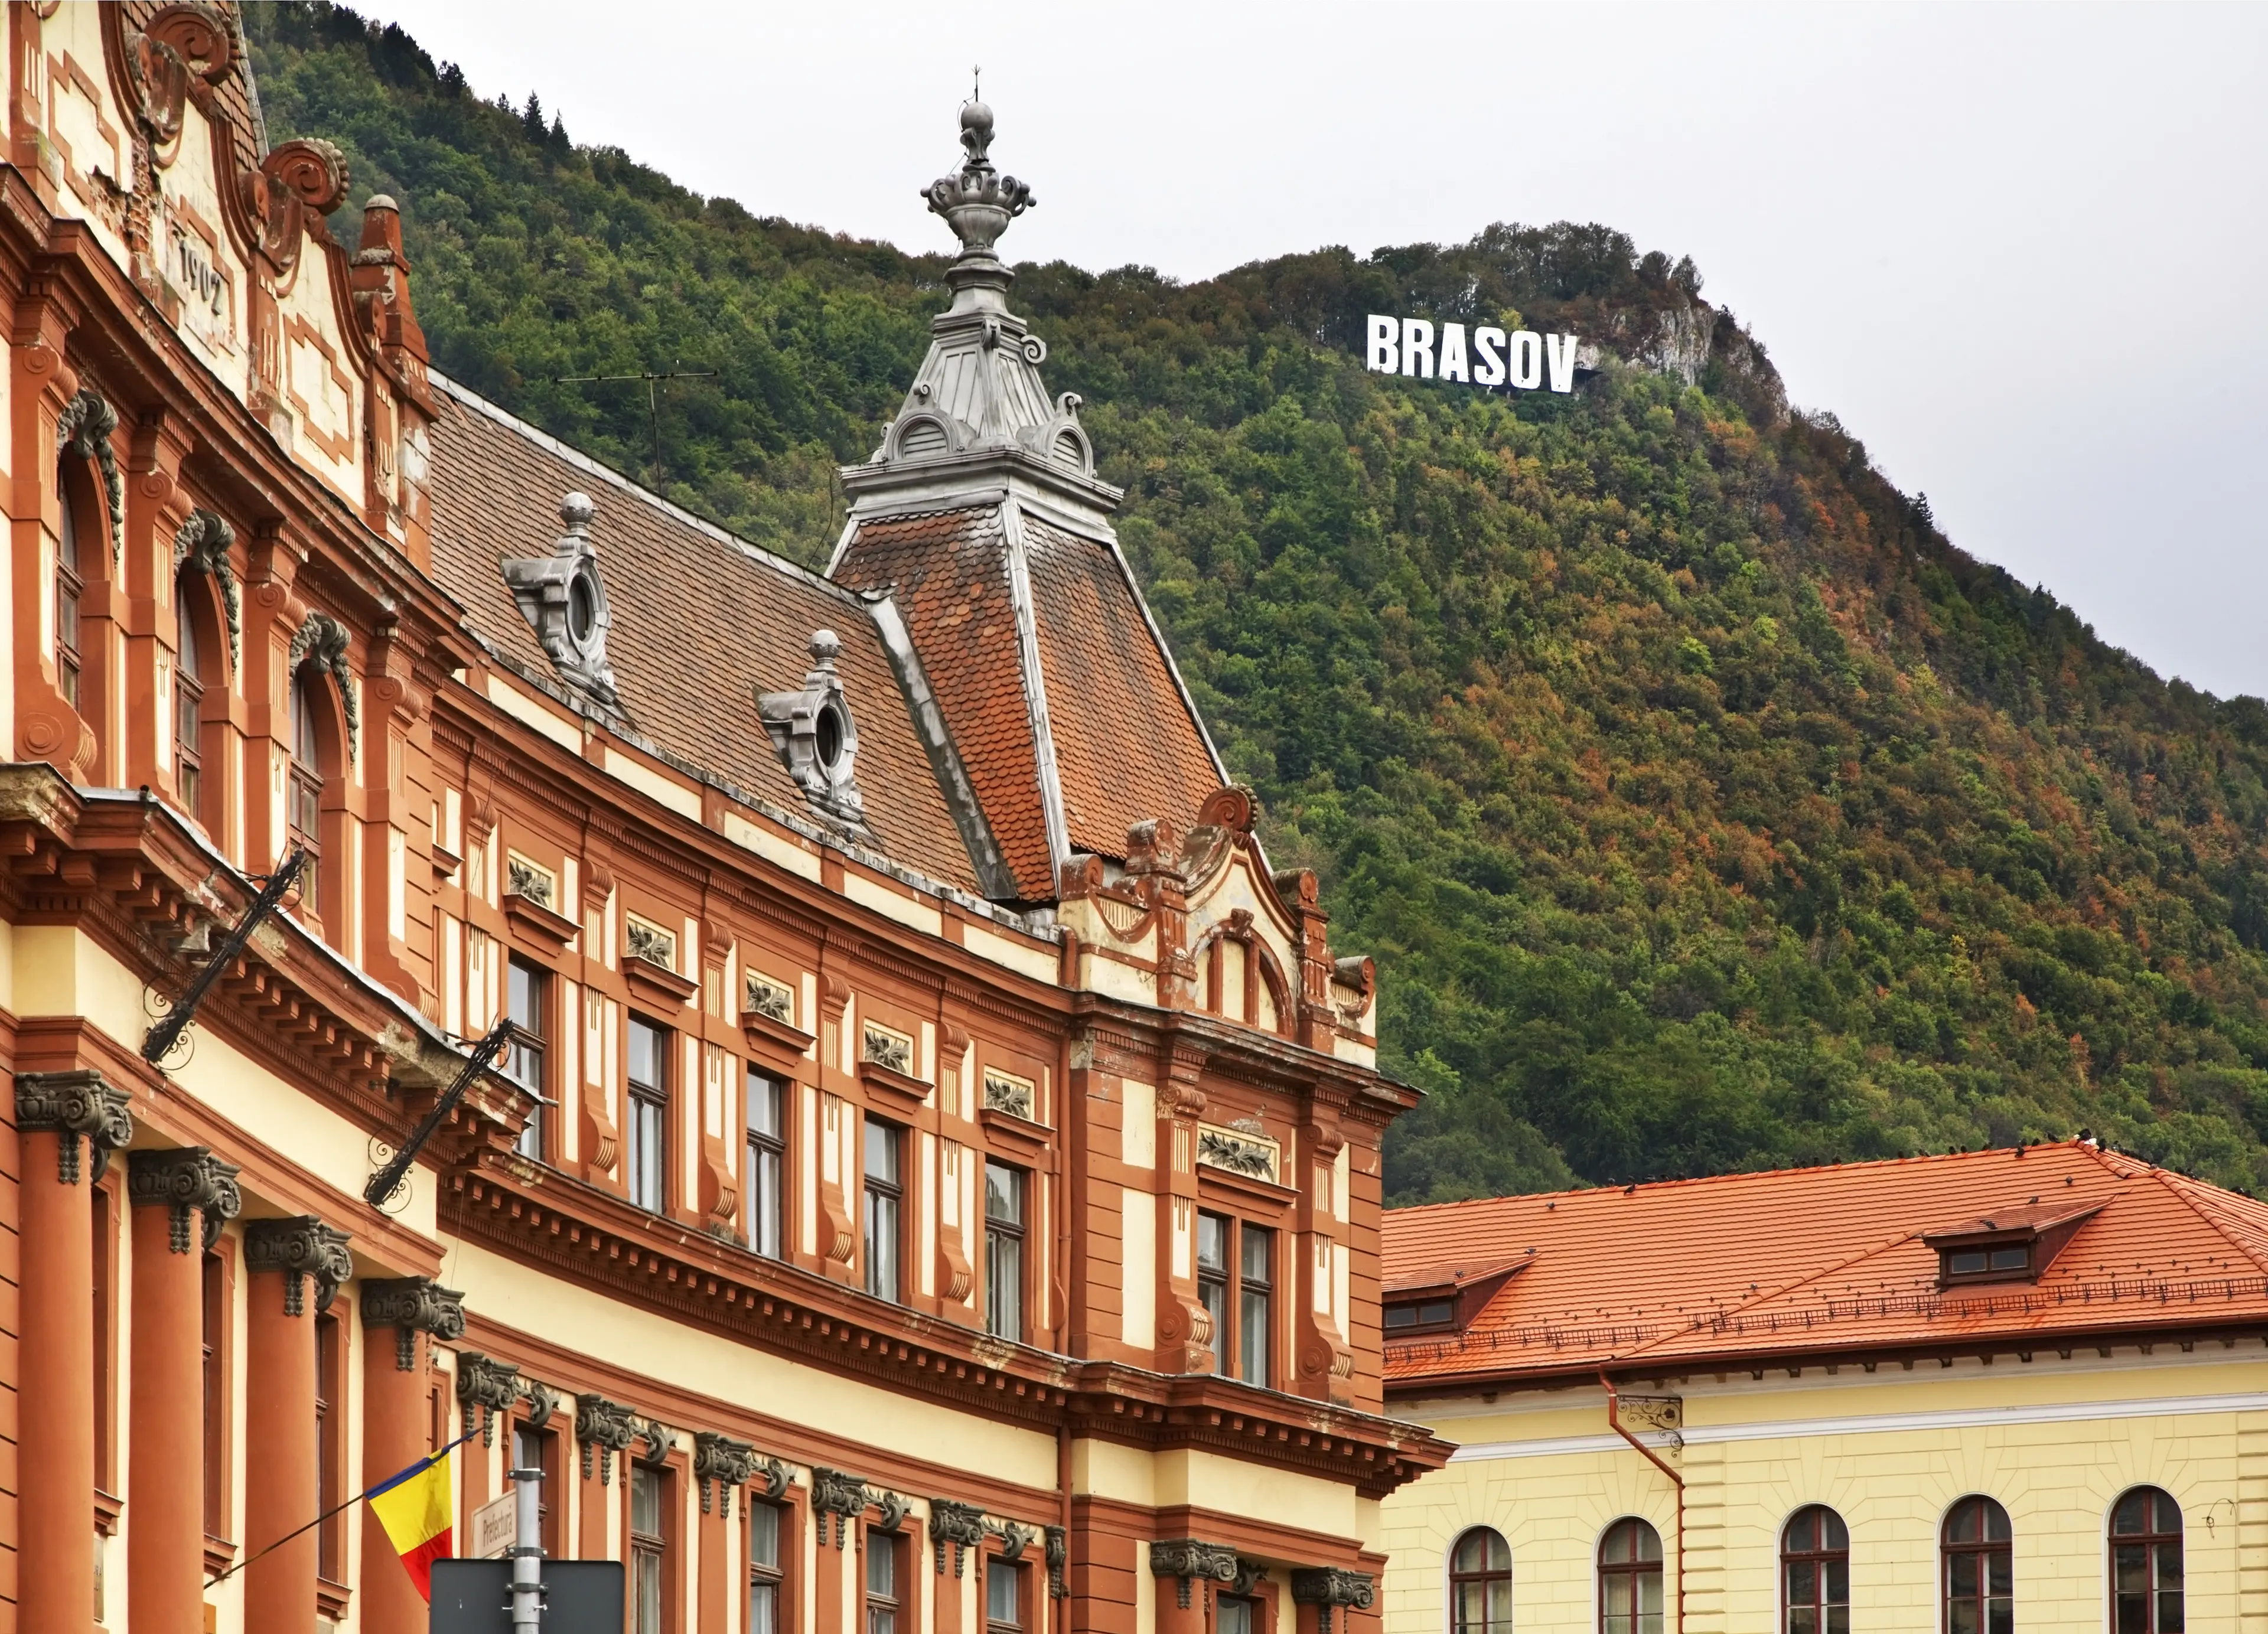 Council of Brasov County with hilltop city sign